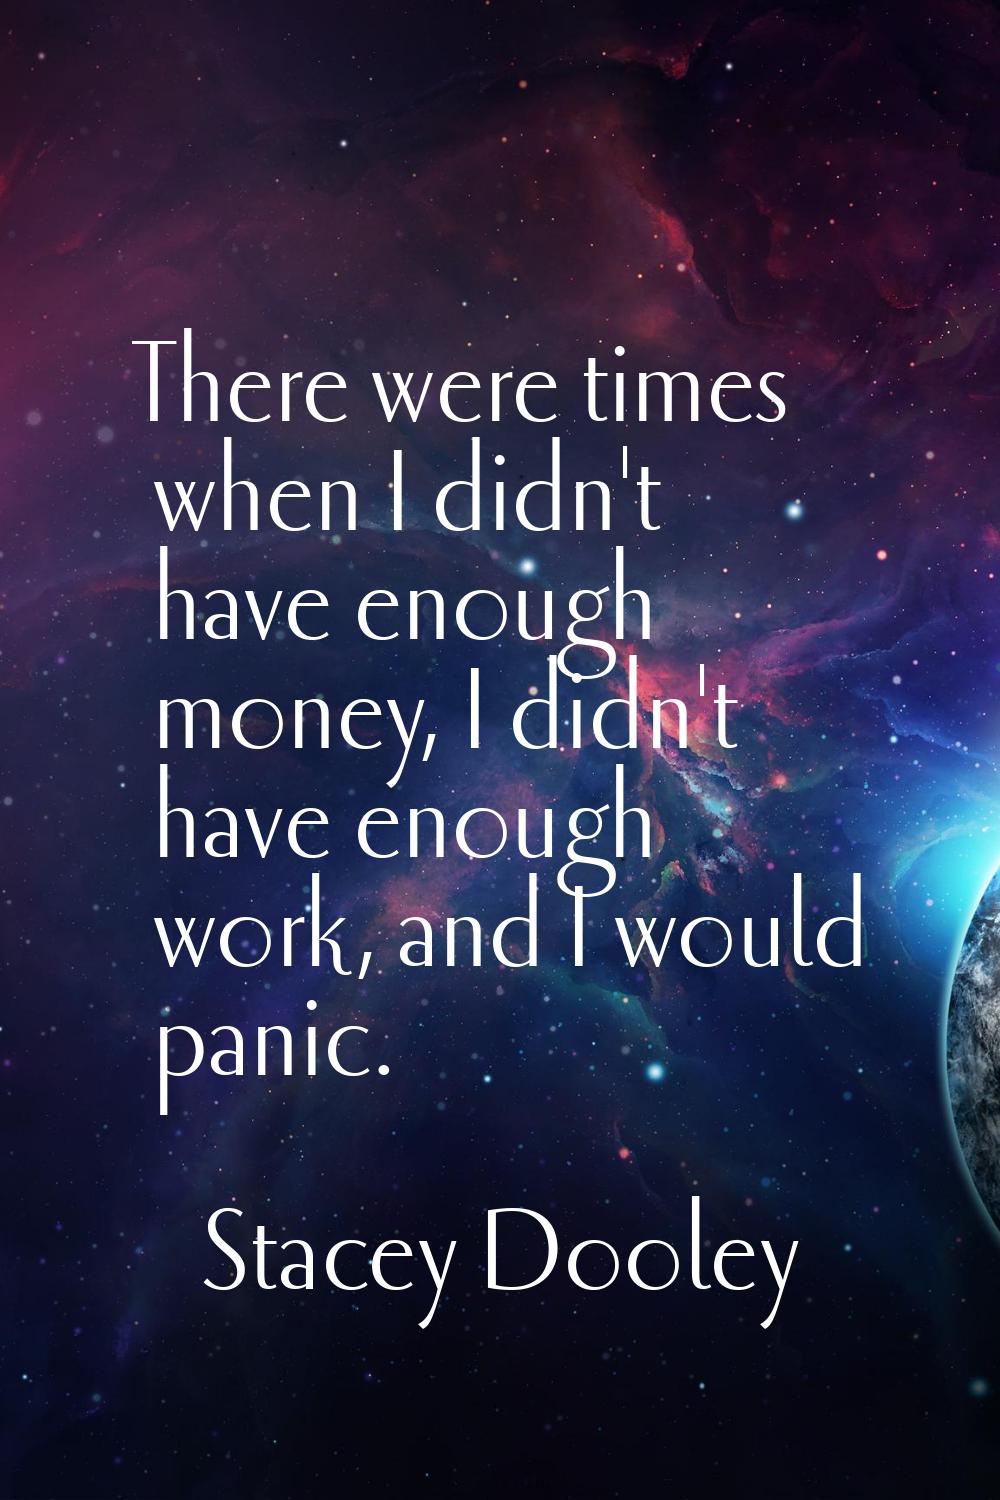 There were times when I didn't have enough money, I didn't have enough work, and I would panic.